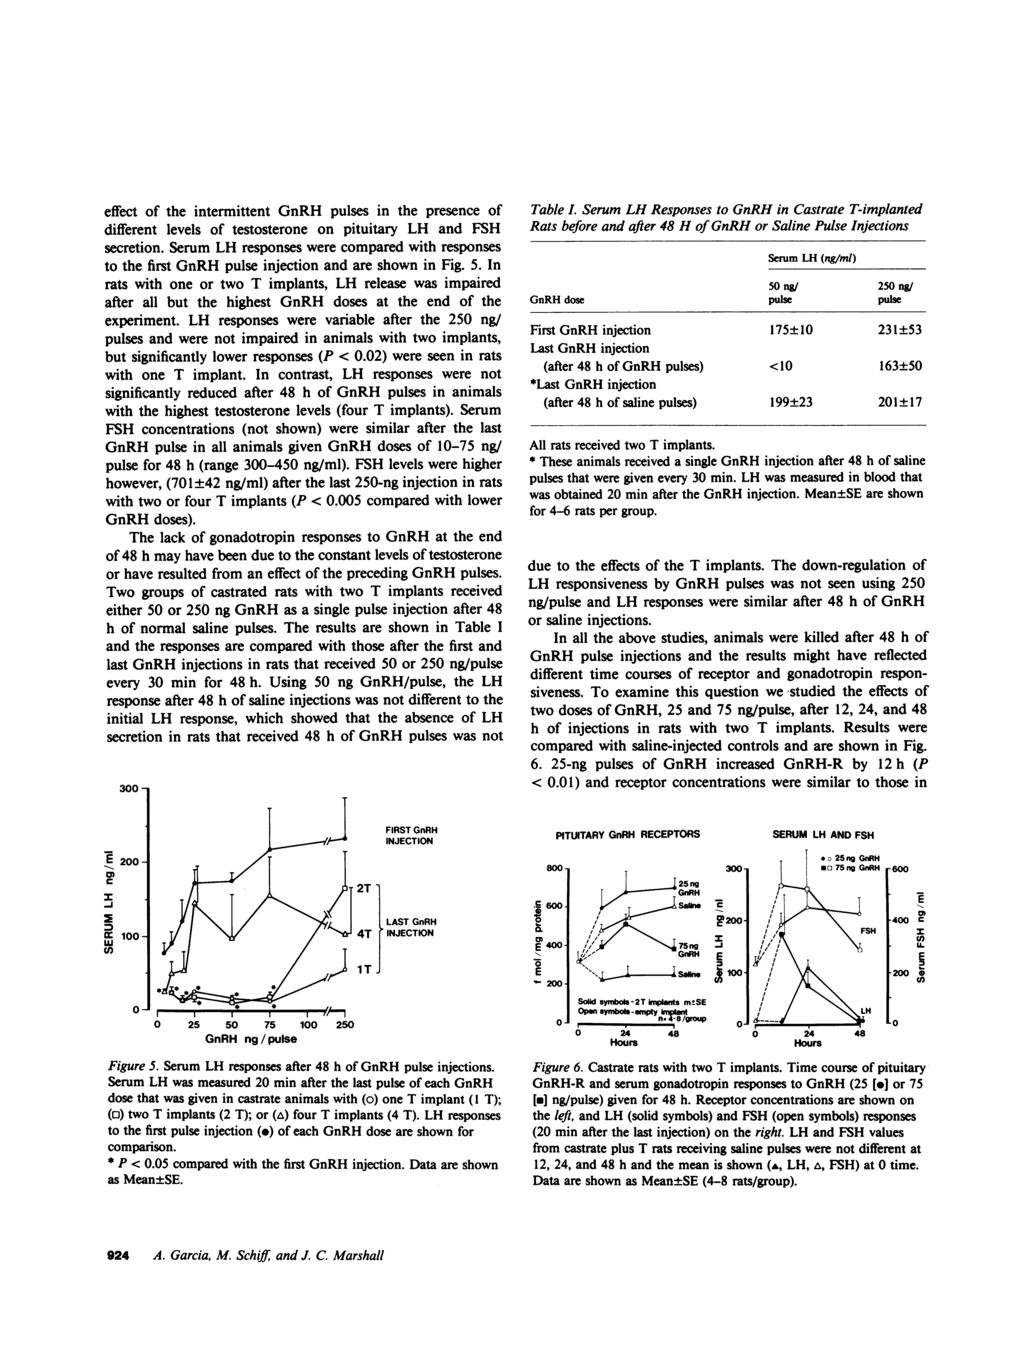 effect of the intermittent GnRH pulses in the presence of different levels of testosterone on pituitary LH and FSH secretion.